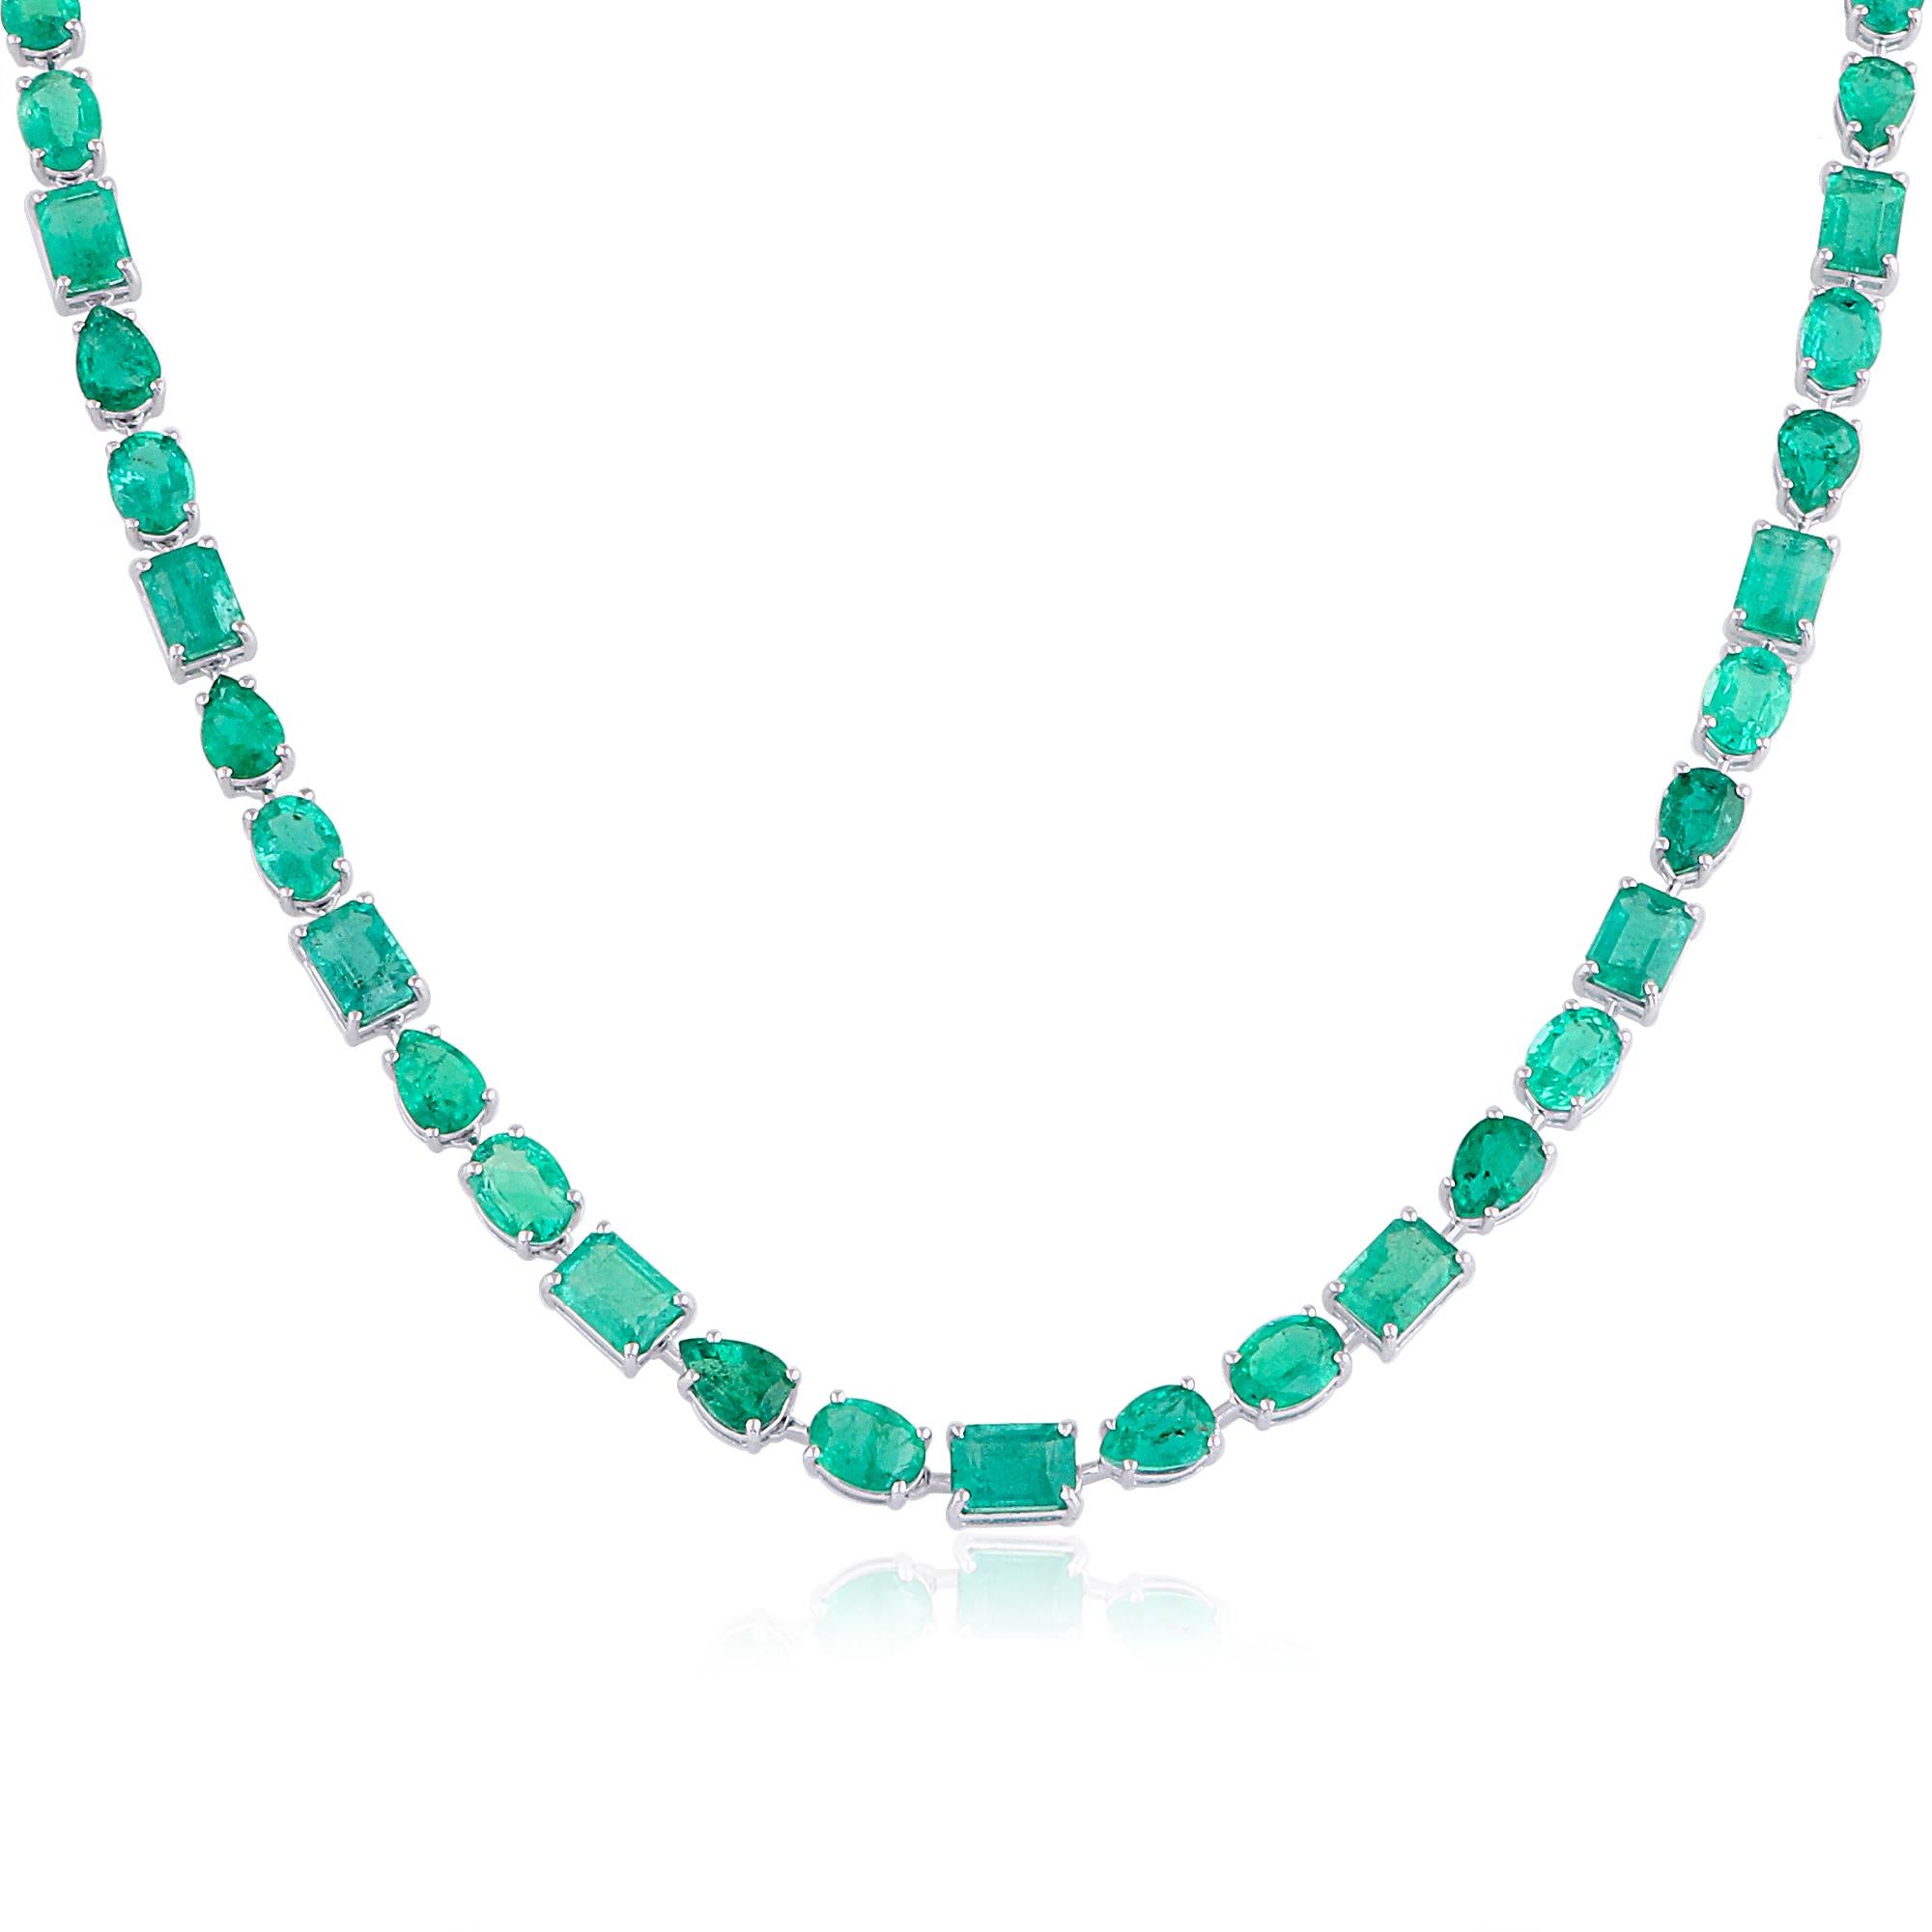 This 34.51 Carat Natural Emerald Gemstone Necklace is a true masterpiece, exuding timeless elegance and sophistication. Whether worn as a stunning accessory to complement an evening gown or as a luxurious statement piece to elevate your everyday